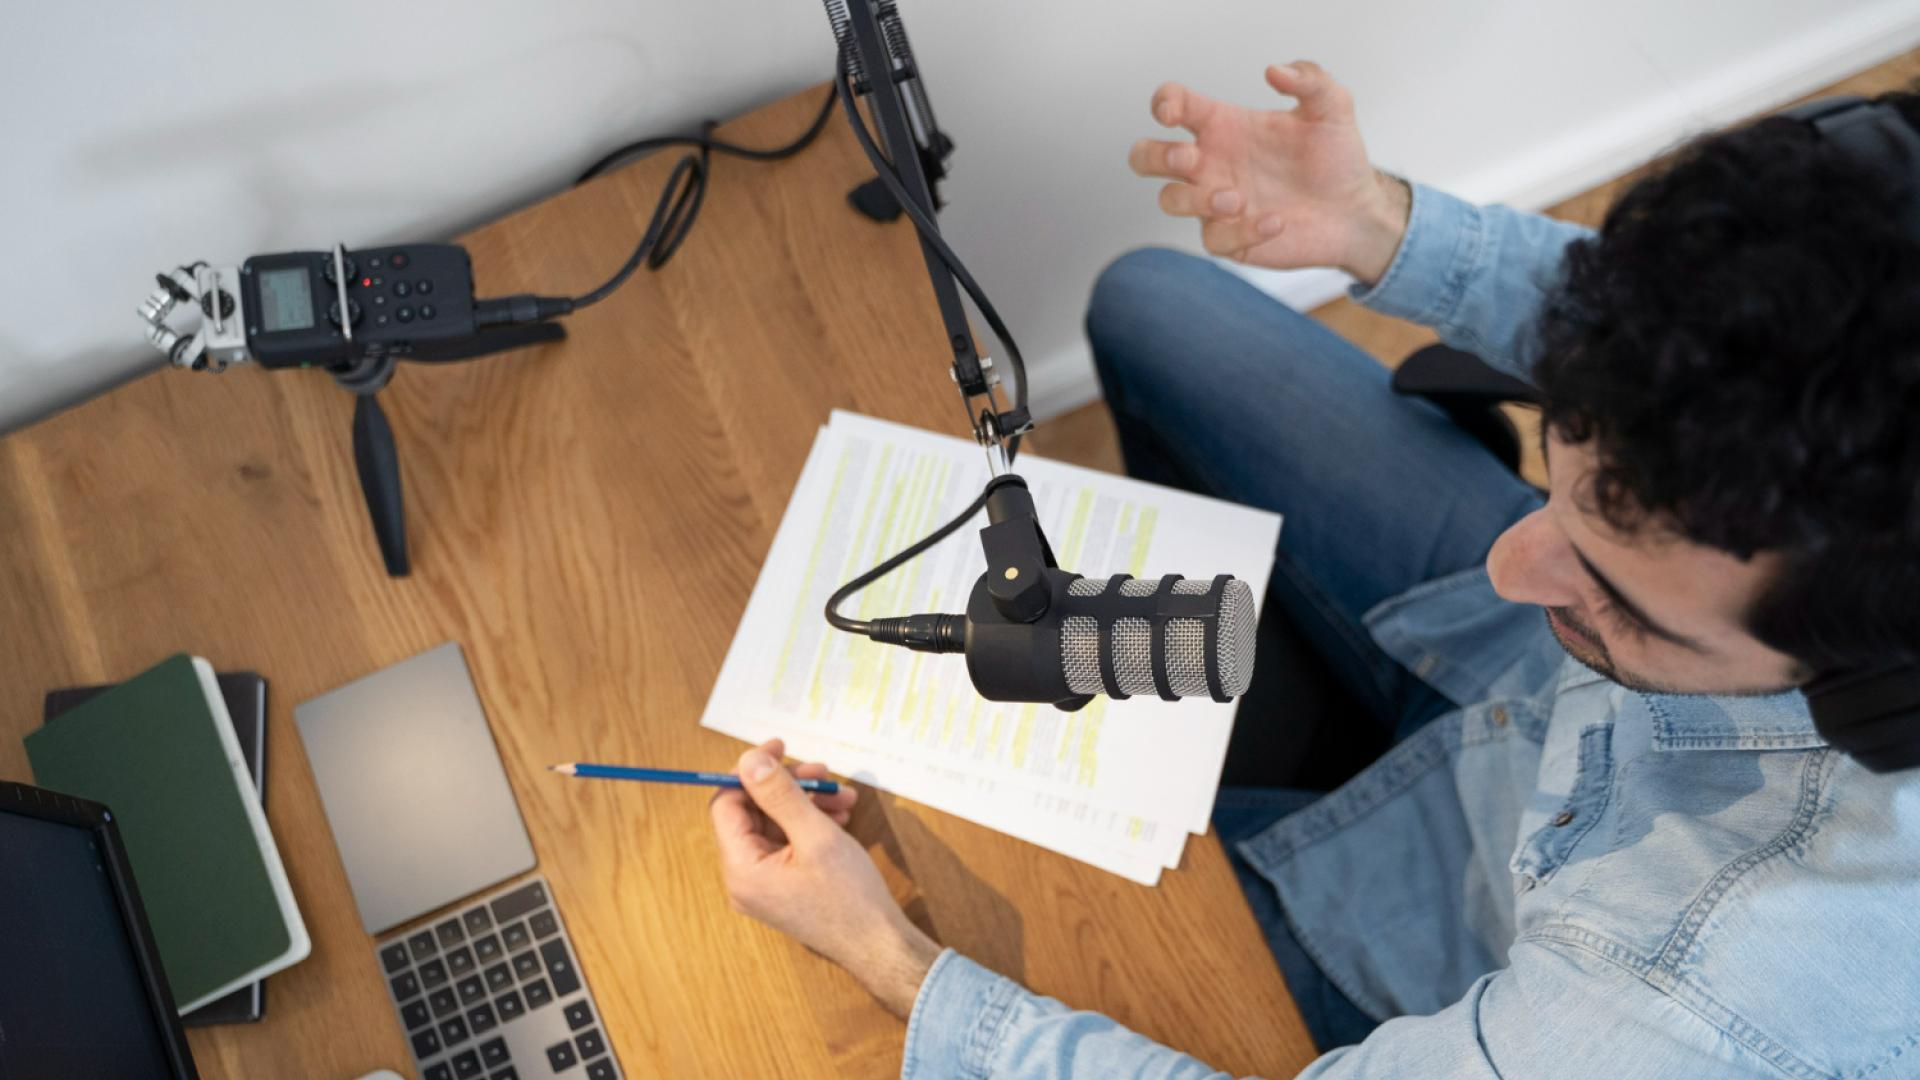 Man with microphone and headphones running a podcast in the studio